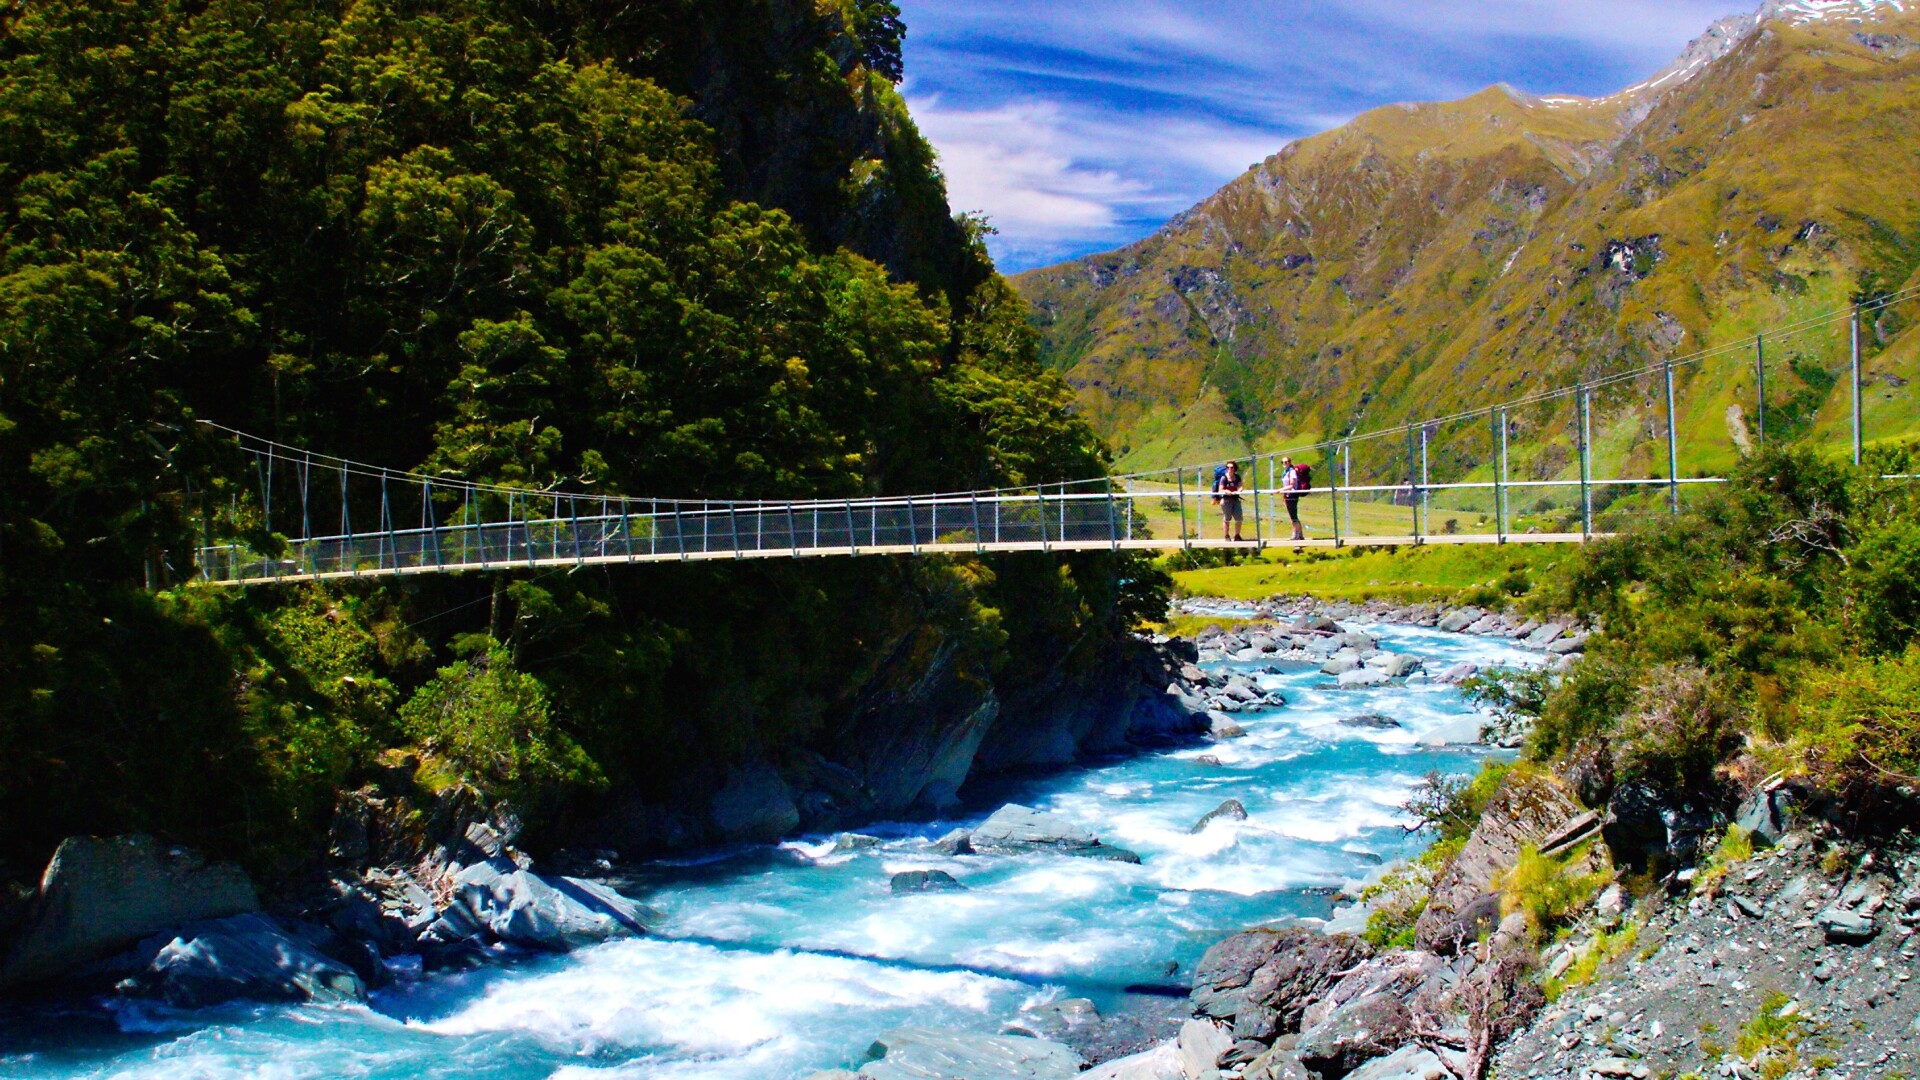 Cross the swing bridge above the West Matukituki River on your way to Rob Roy Glacier.